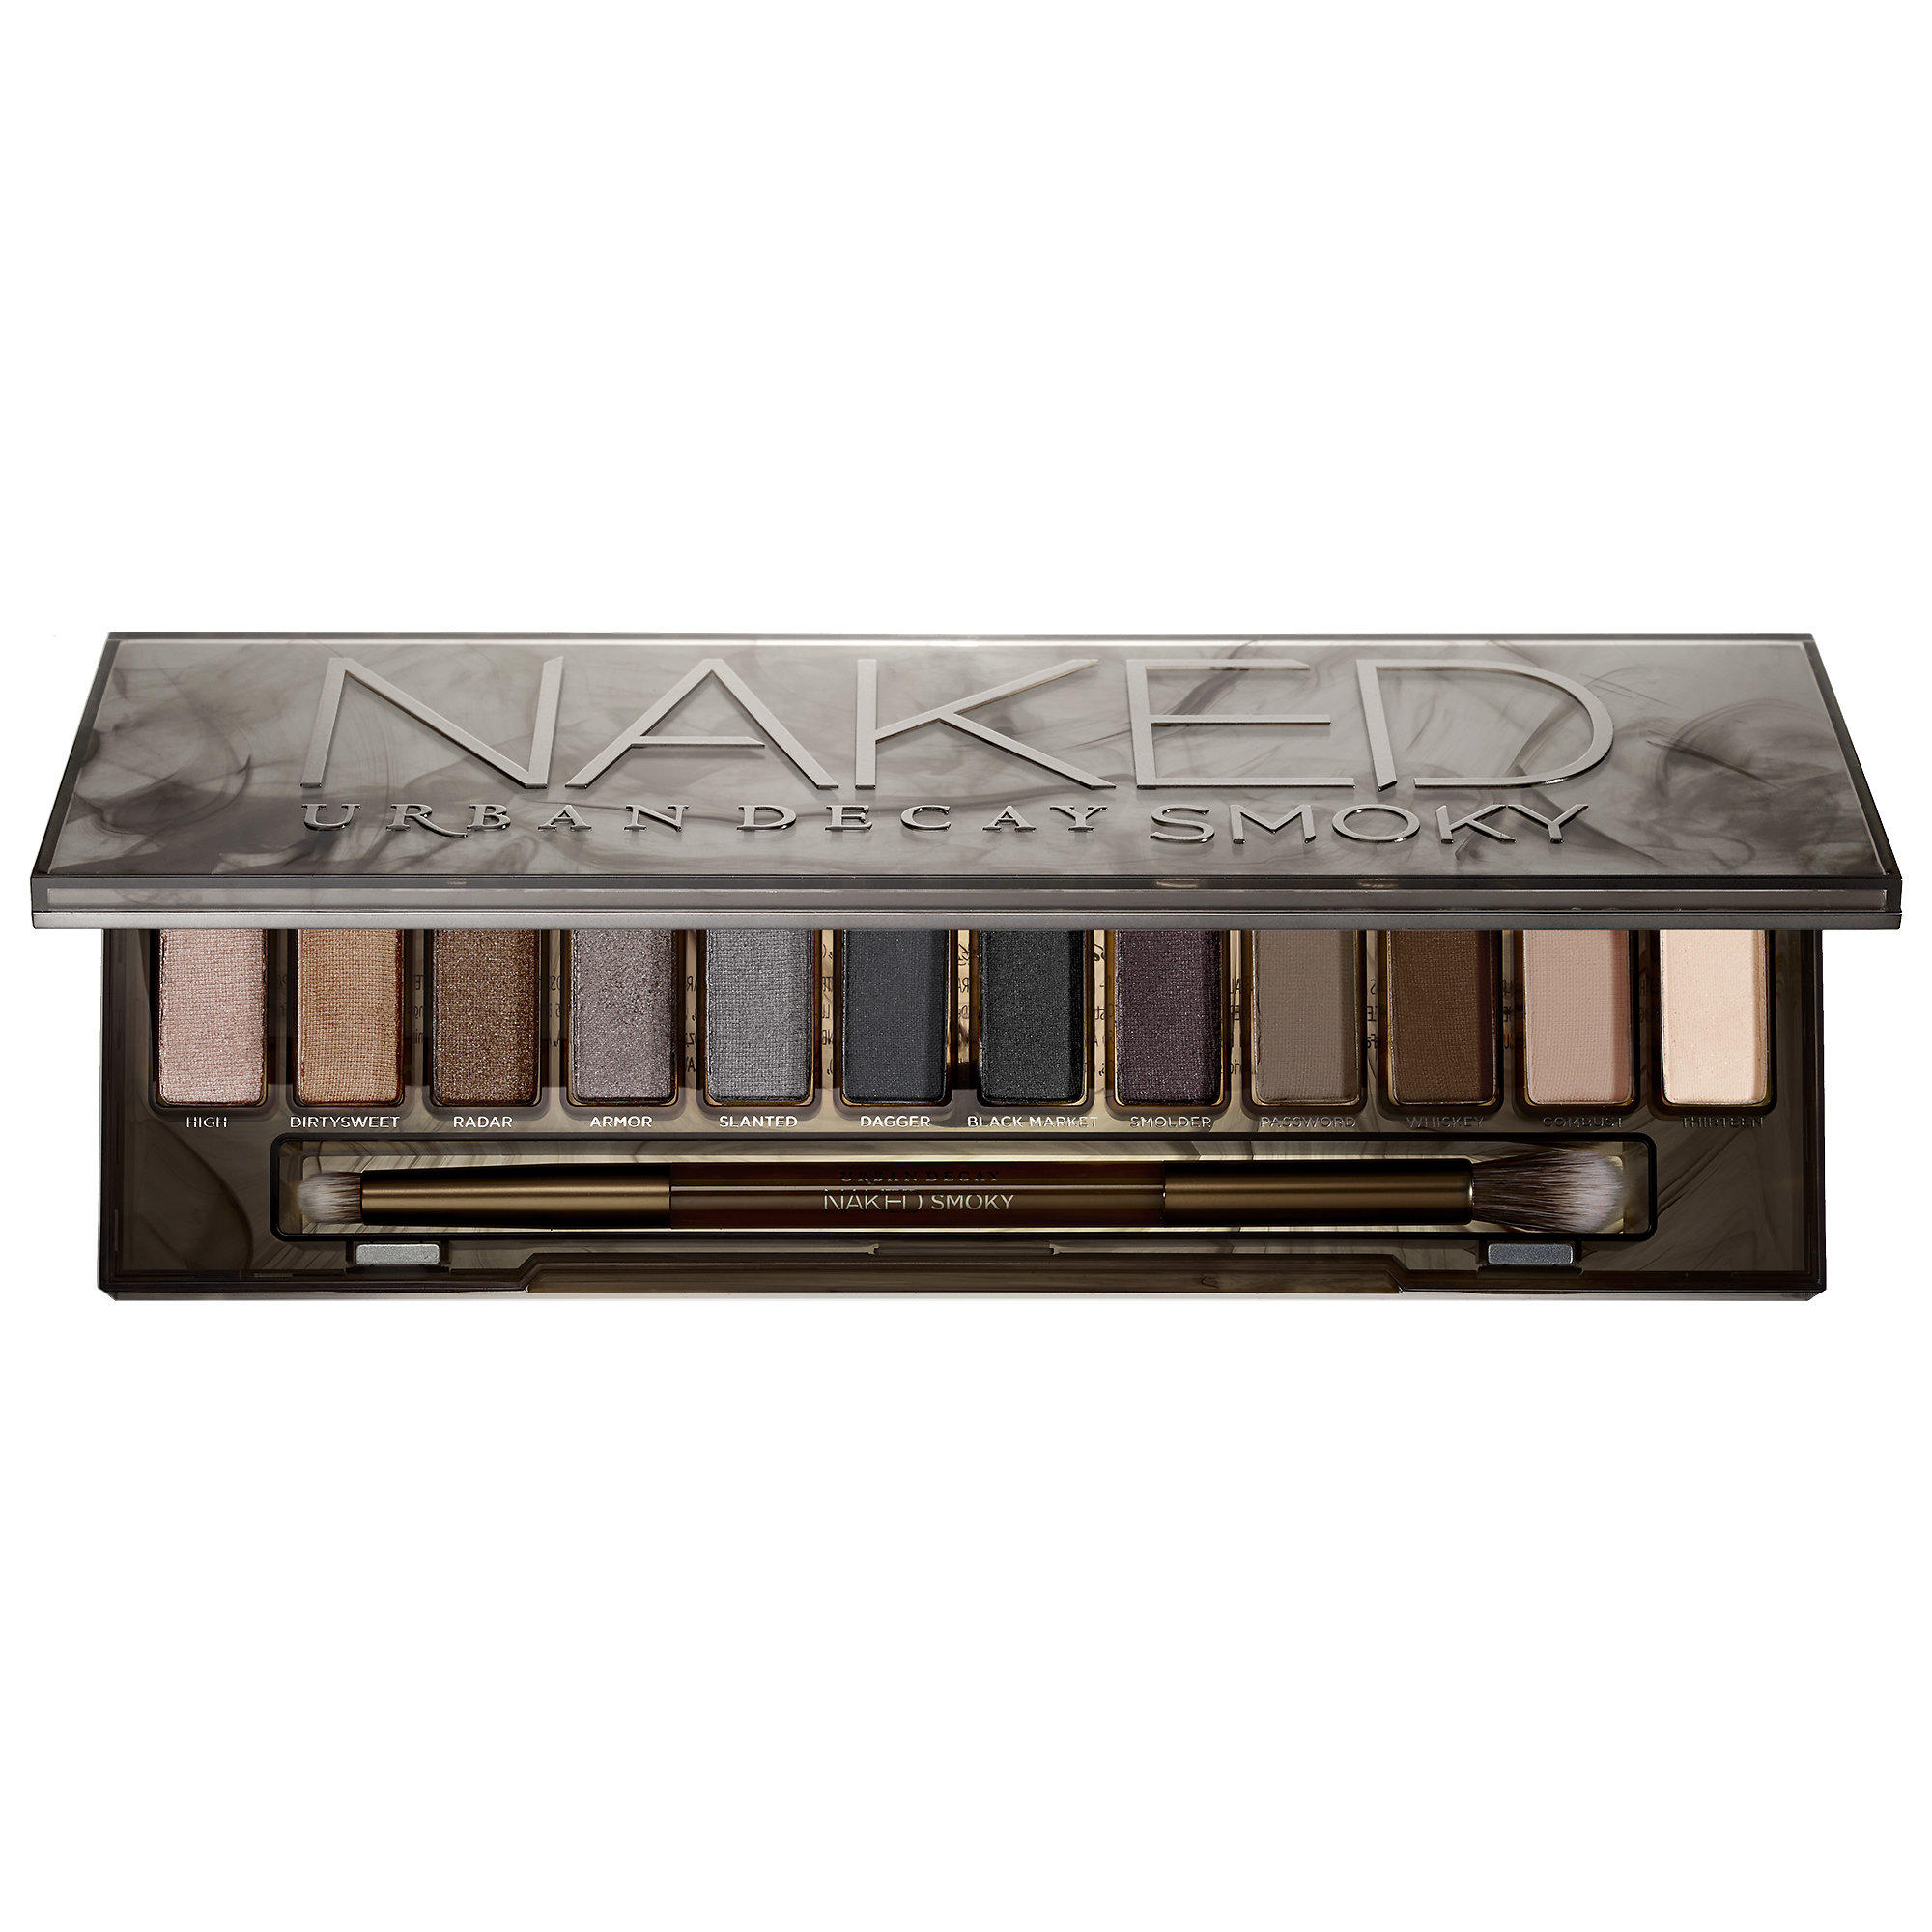 NEW IN: Urban Decay Naked Smoky Palette | Beauty Passionista